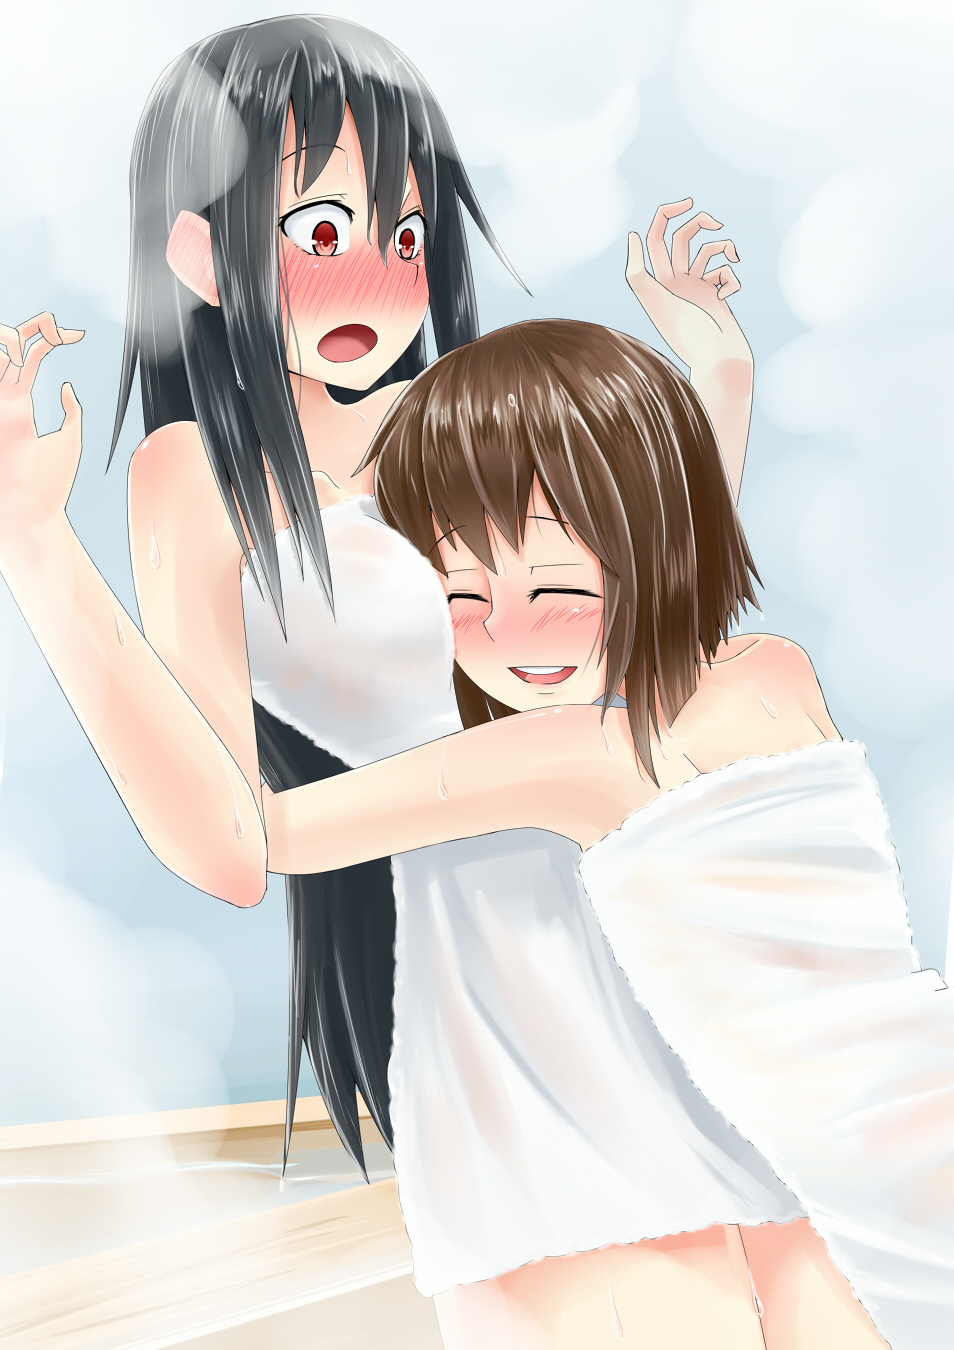 2girls bath black_hair blush brown_hair closed_eyes commentary_request hatsushimo_(kantai_collection) highres hug kantai_collection long_hair multiple_girls naked_towel open_mouth red_eyes short_hair steam towel wet yukikaze_(kantai_collection) yuri zaki_(2872849)